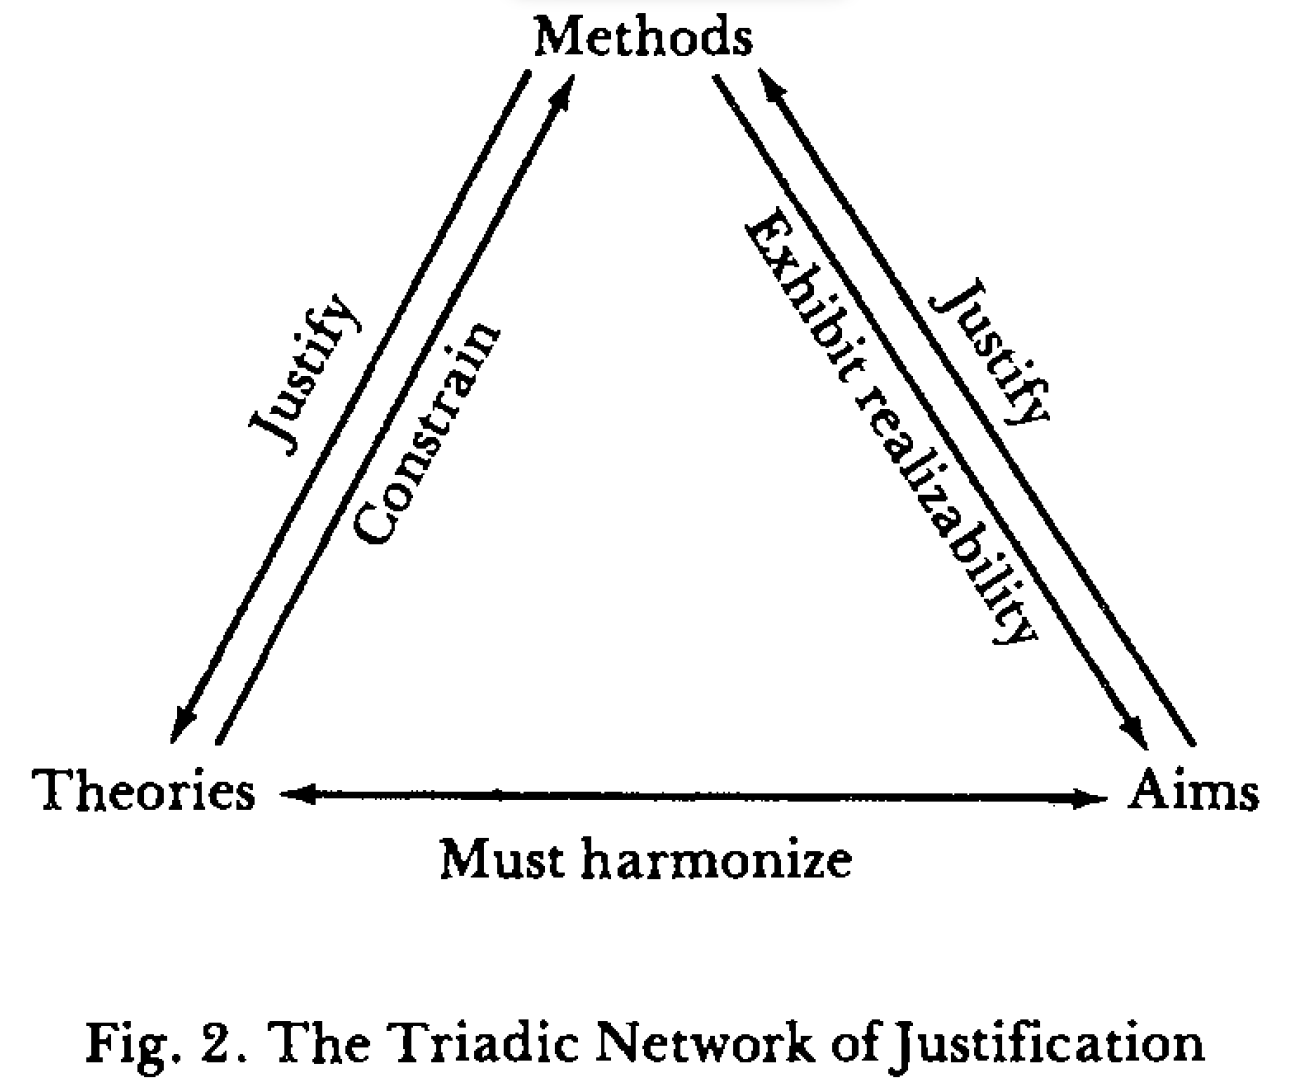 The interrelationship between the methdological level, theories that explain factual observation, and the aims of science according to Laudan's reticulated model of scientific rationality.